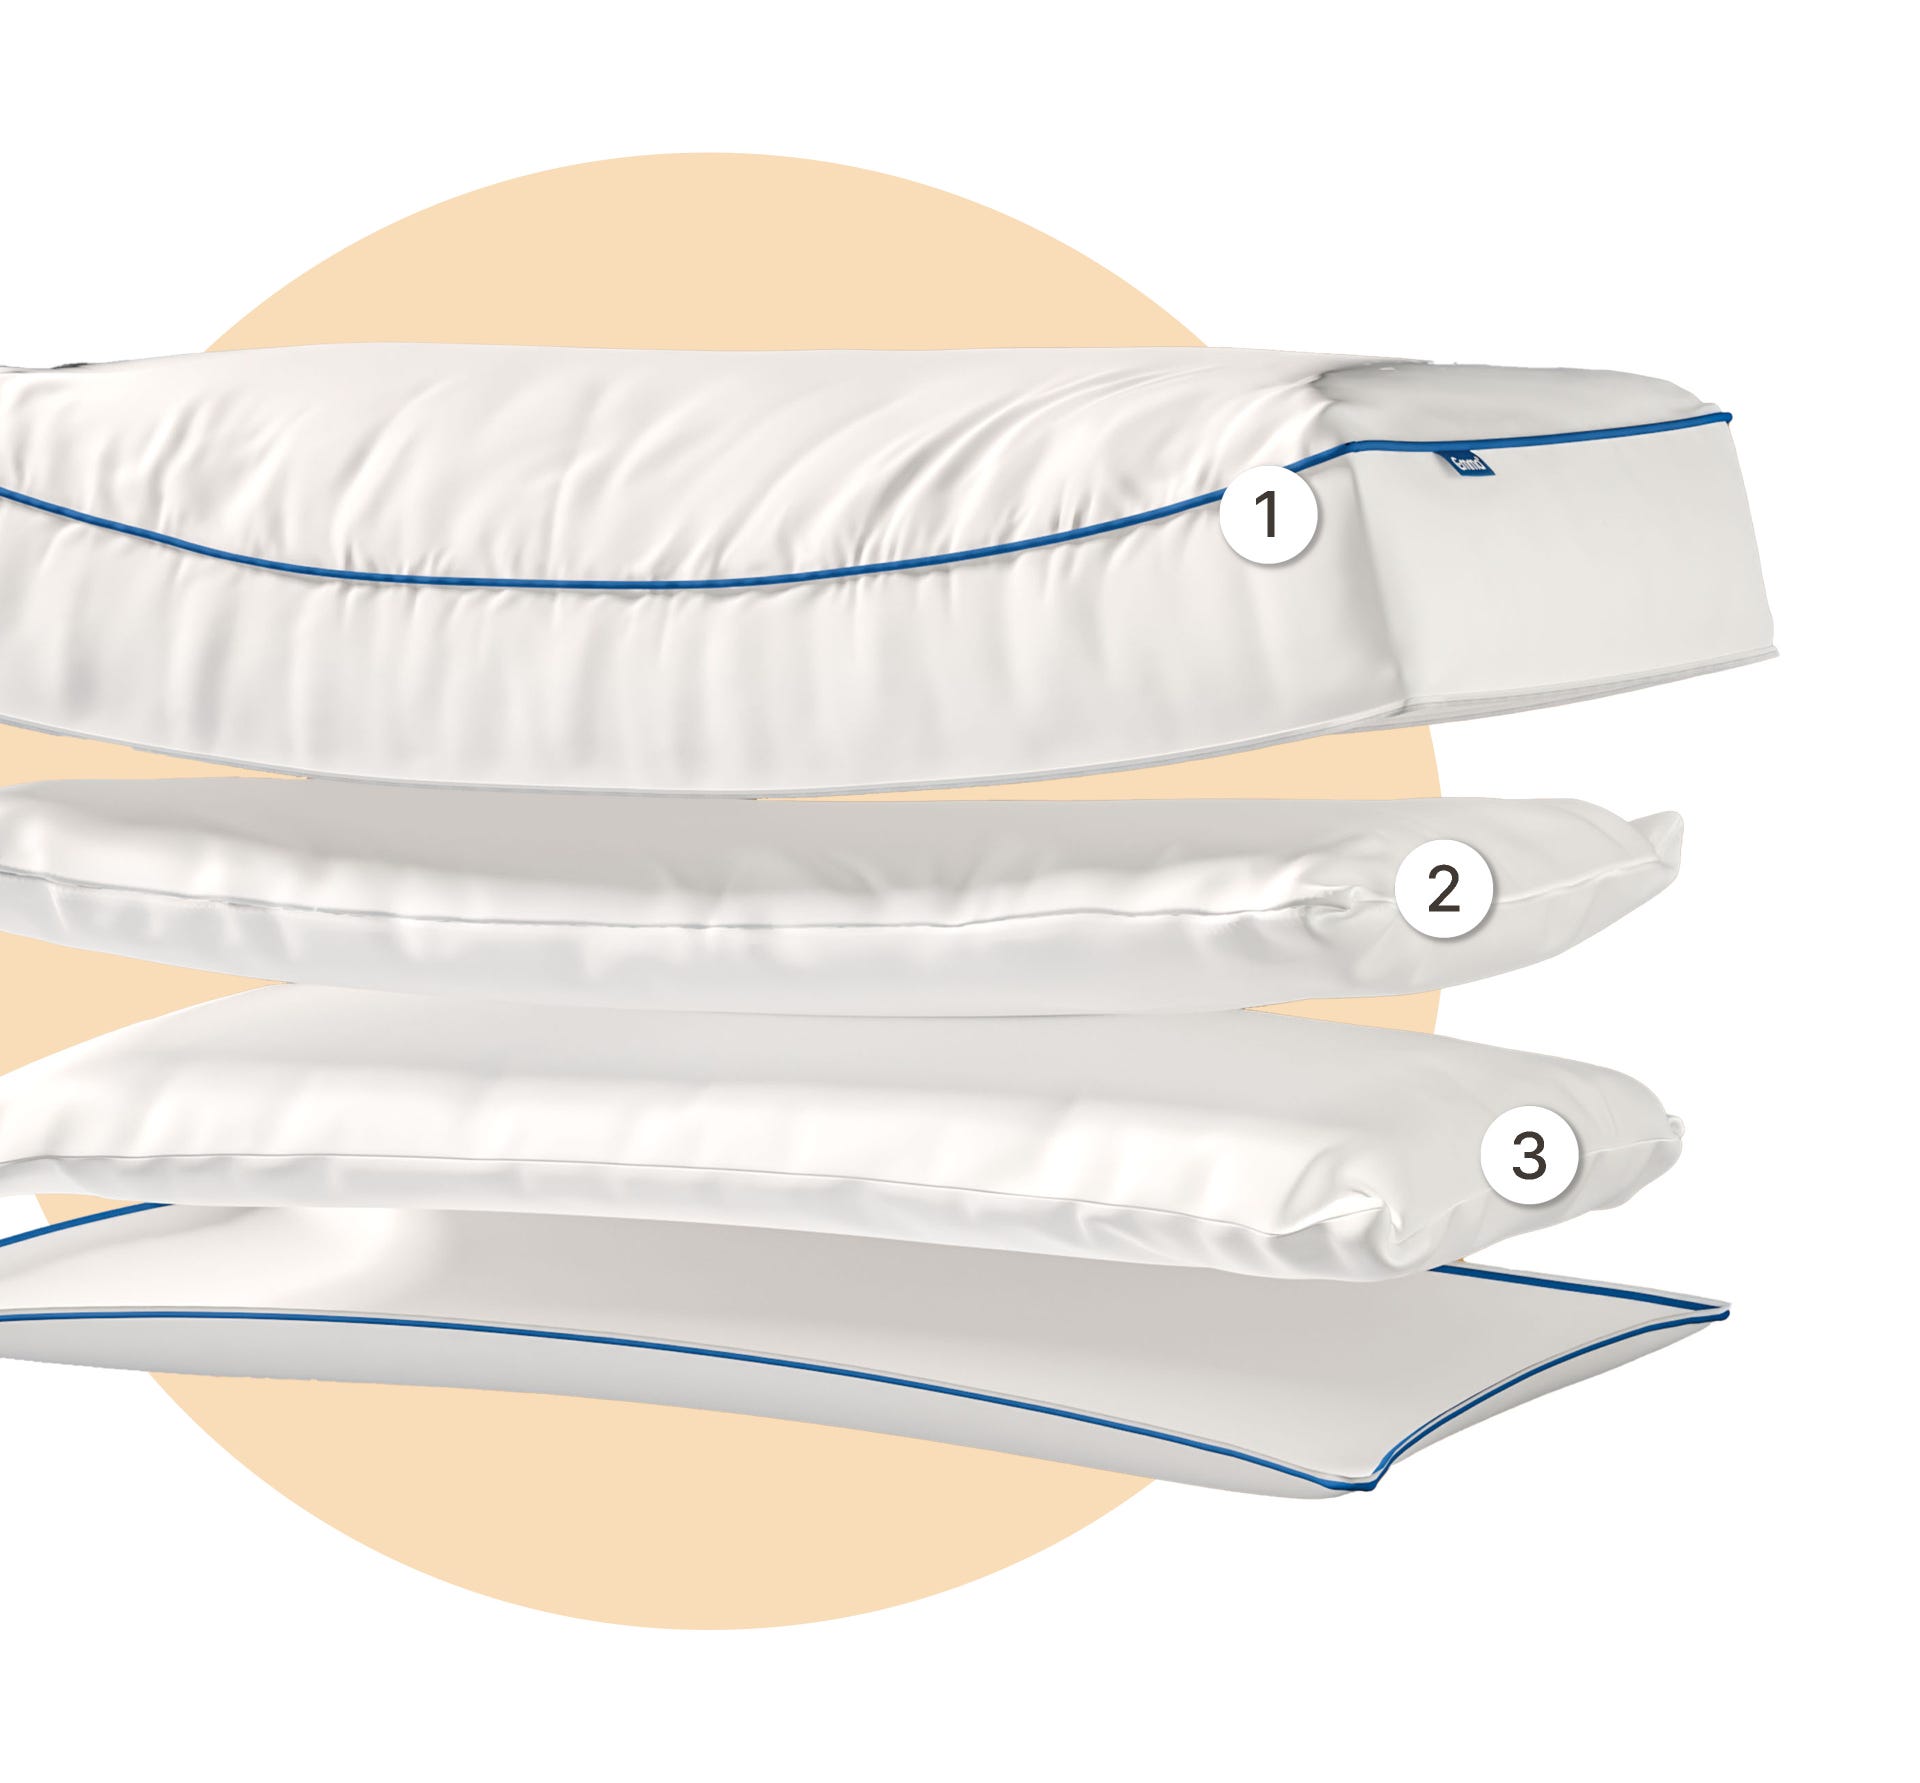 Oval_Pillow_Layers_Details.jpg